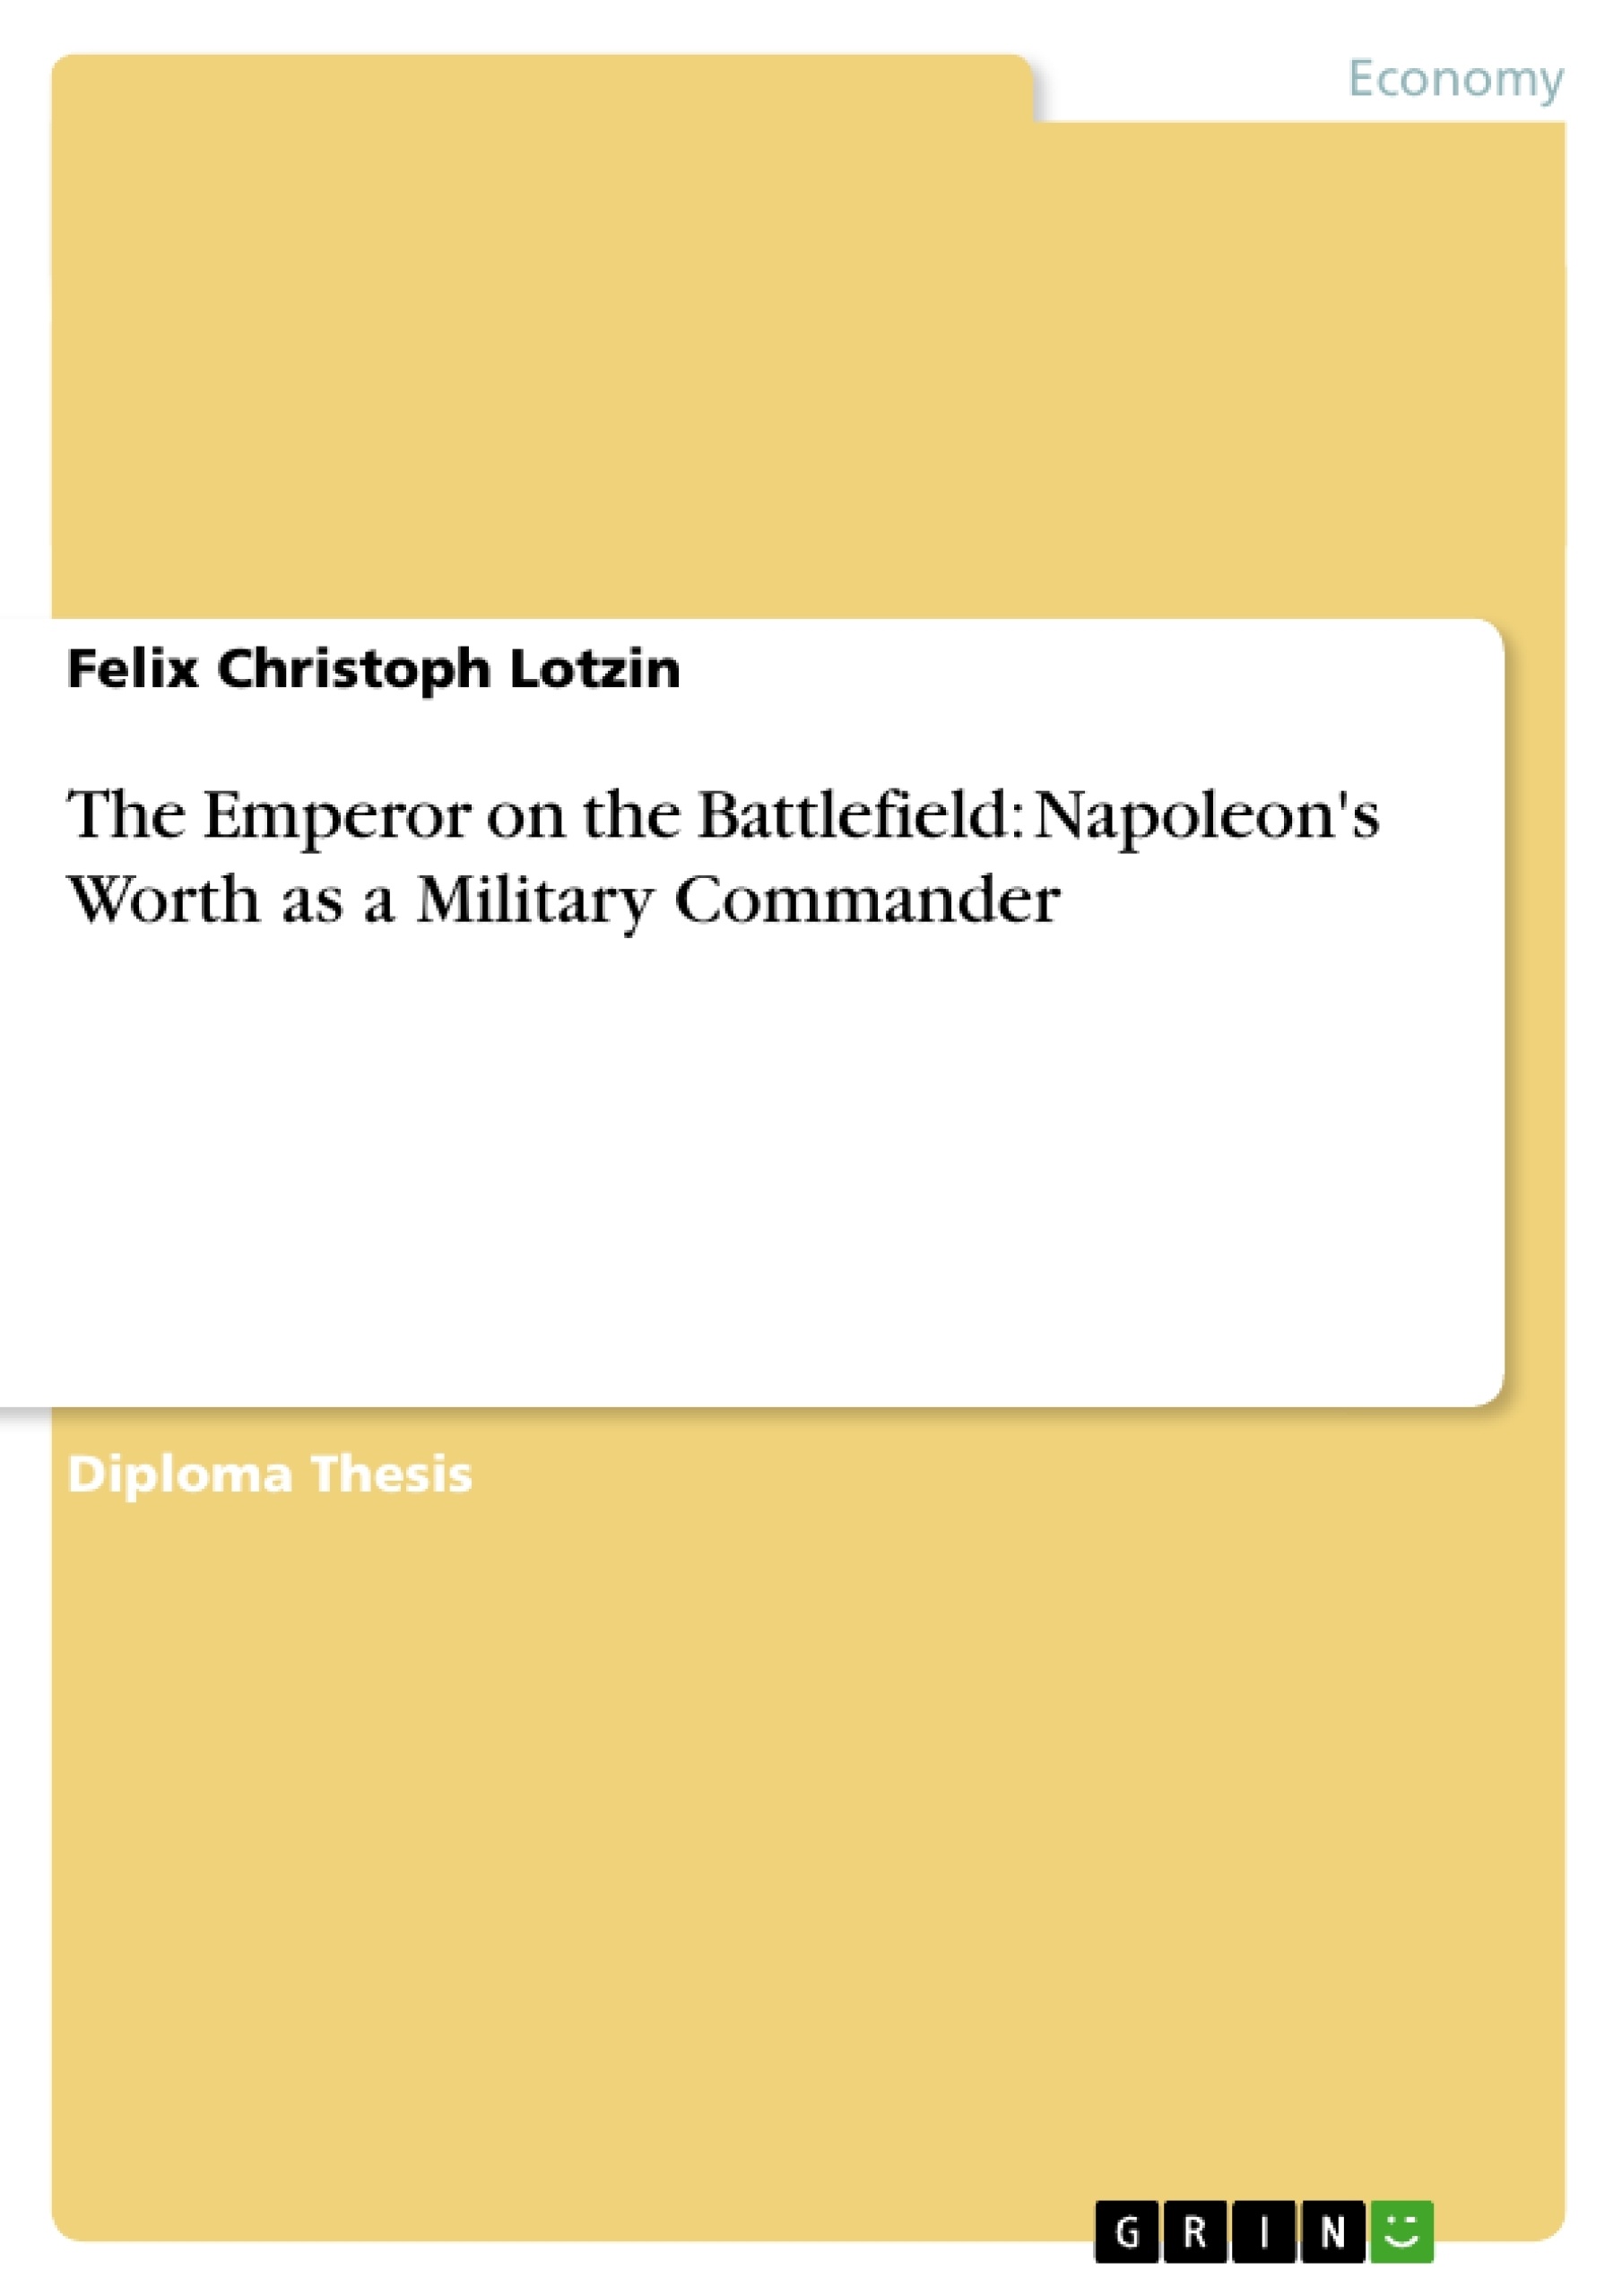 Título: The Emperor on the Battlefield: Napoleon's Worth as a Military Commander